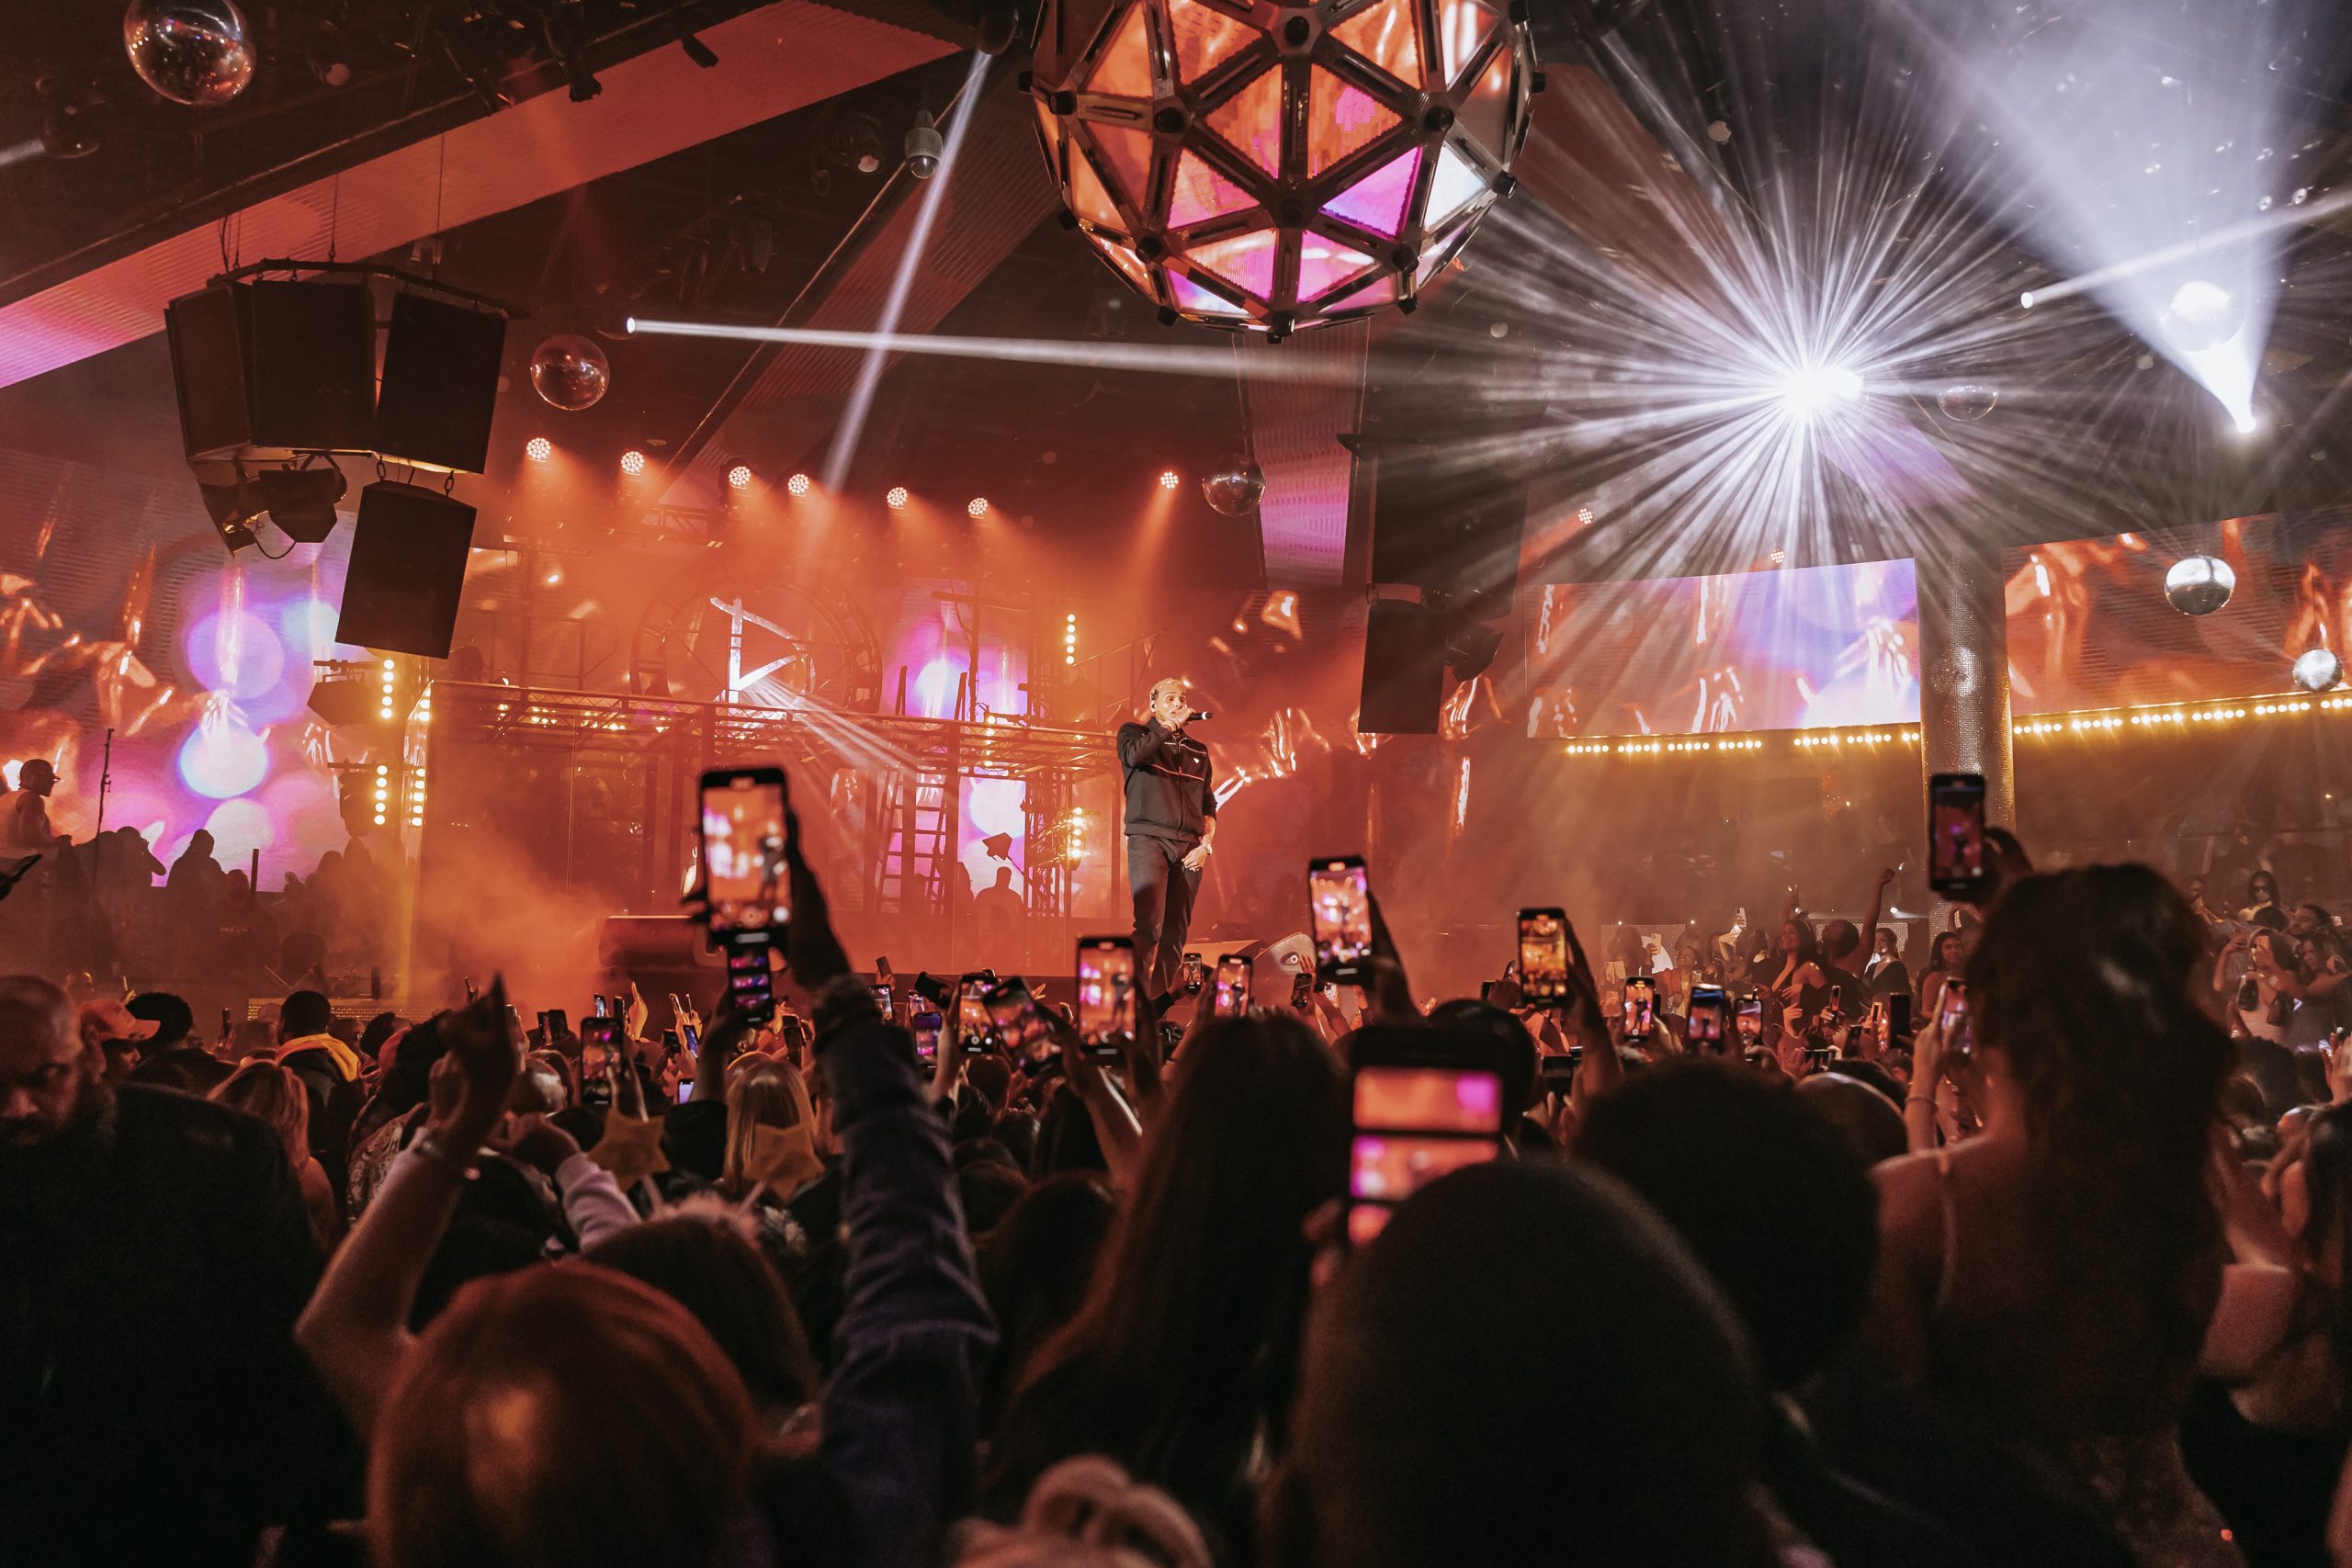 Thousands of fans take in Chris Brown's sold-out NYE performance at Drai's 12 31 22 (2) credit Radis Denphutaraphrechar